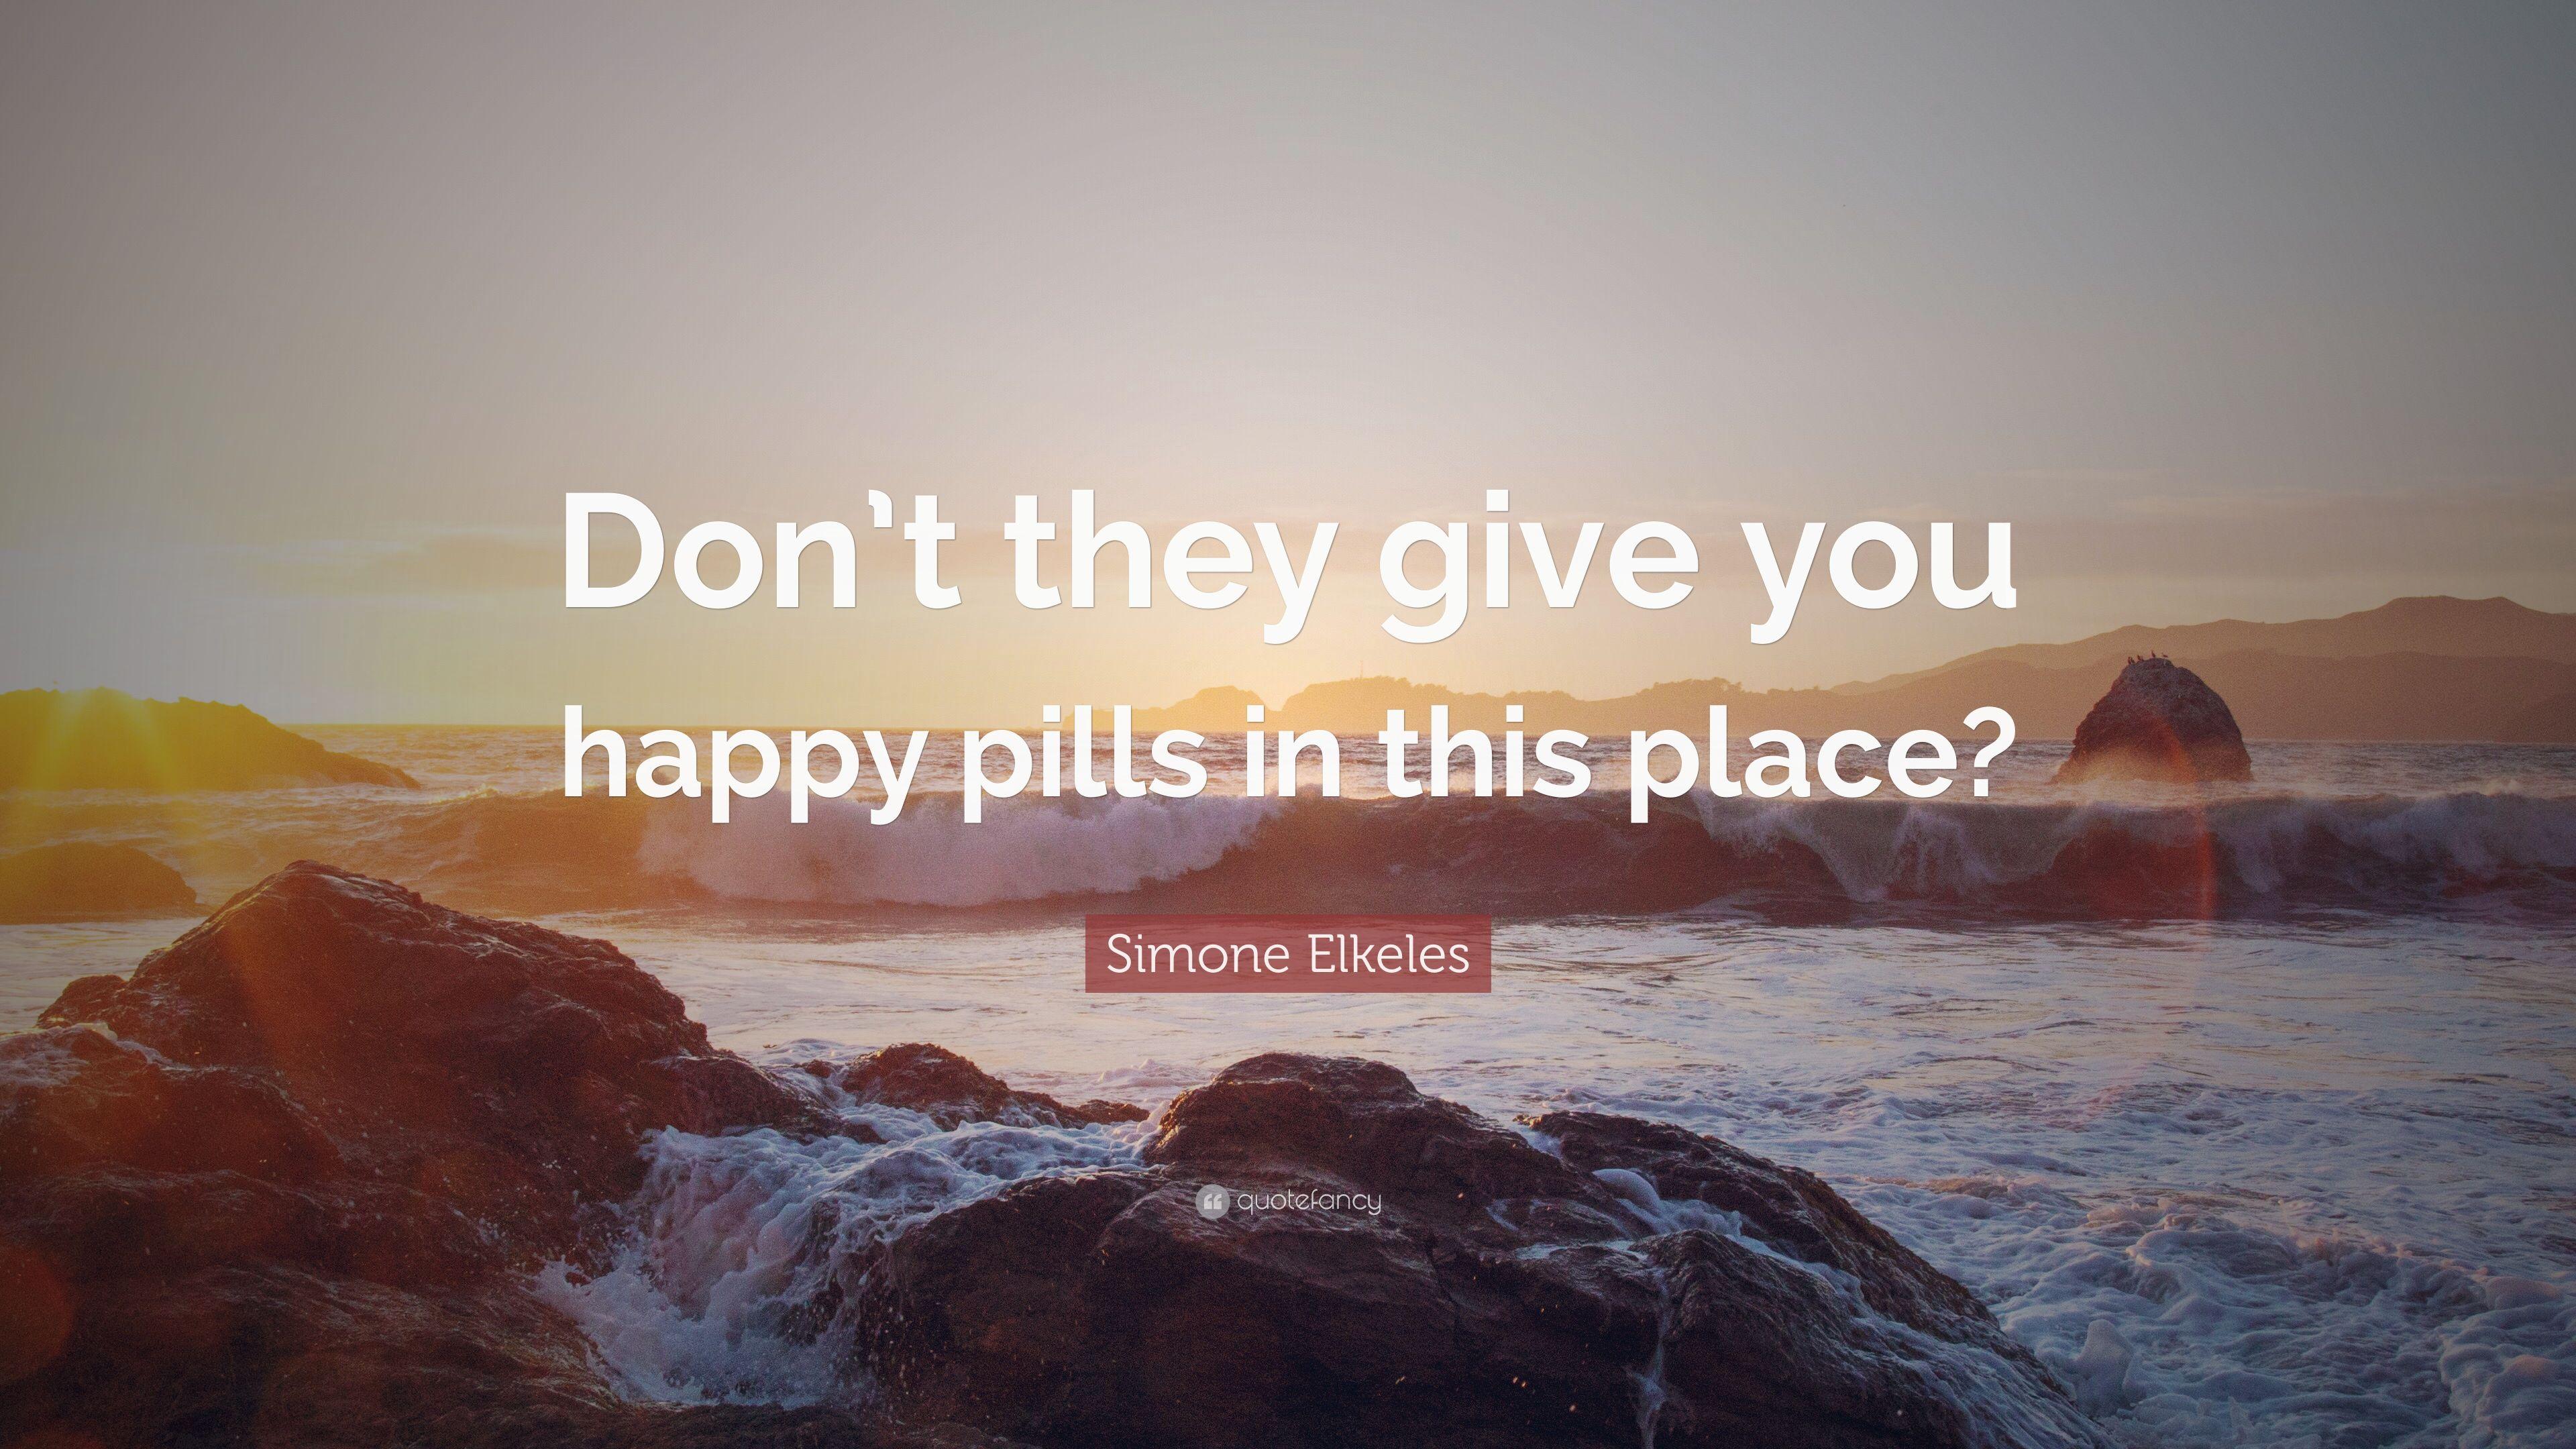 Simone Elkeles Quote: “Don't they give you happy pills